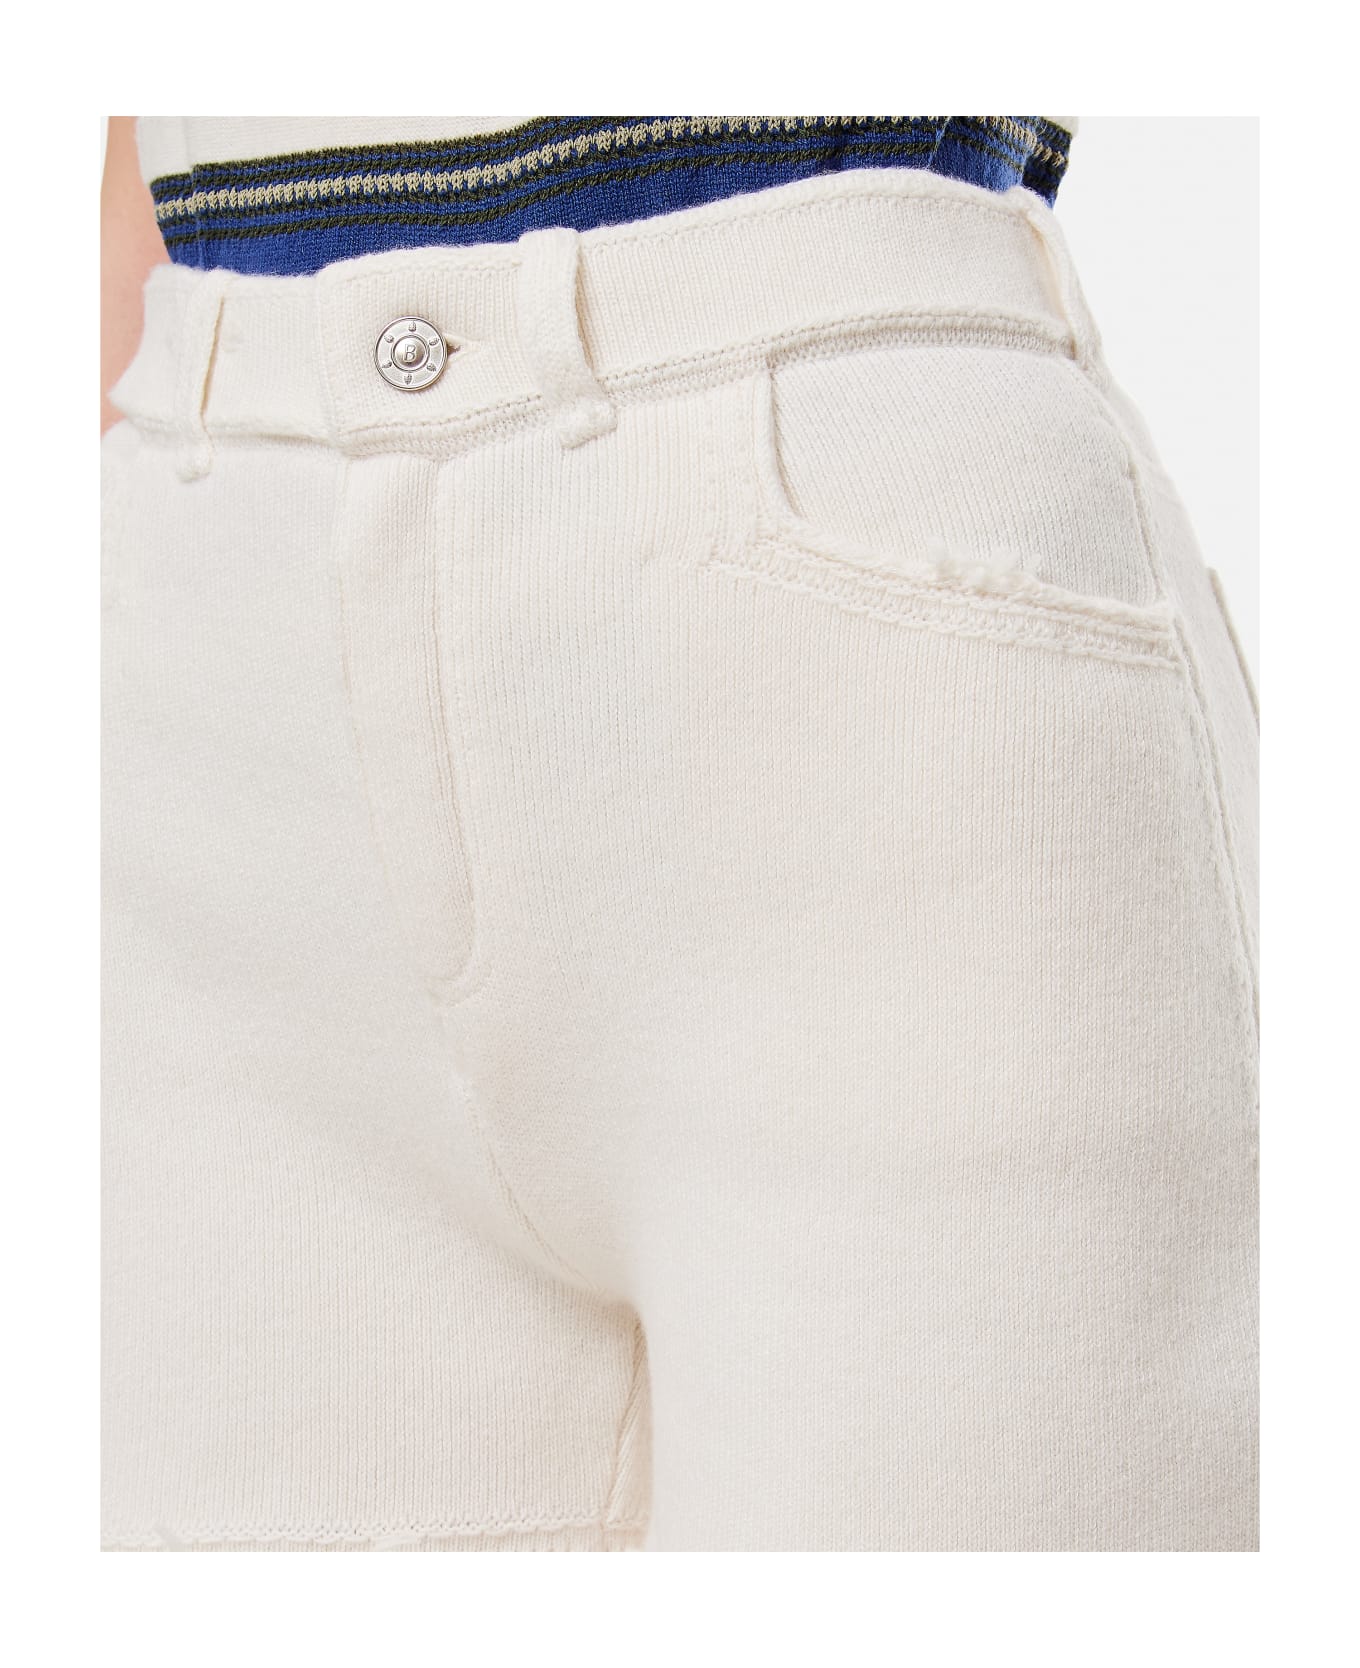 Barrie Distressed Cashmere Shorts - White